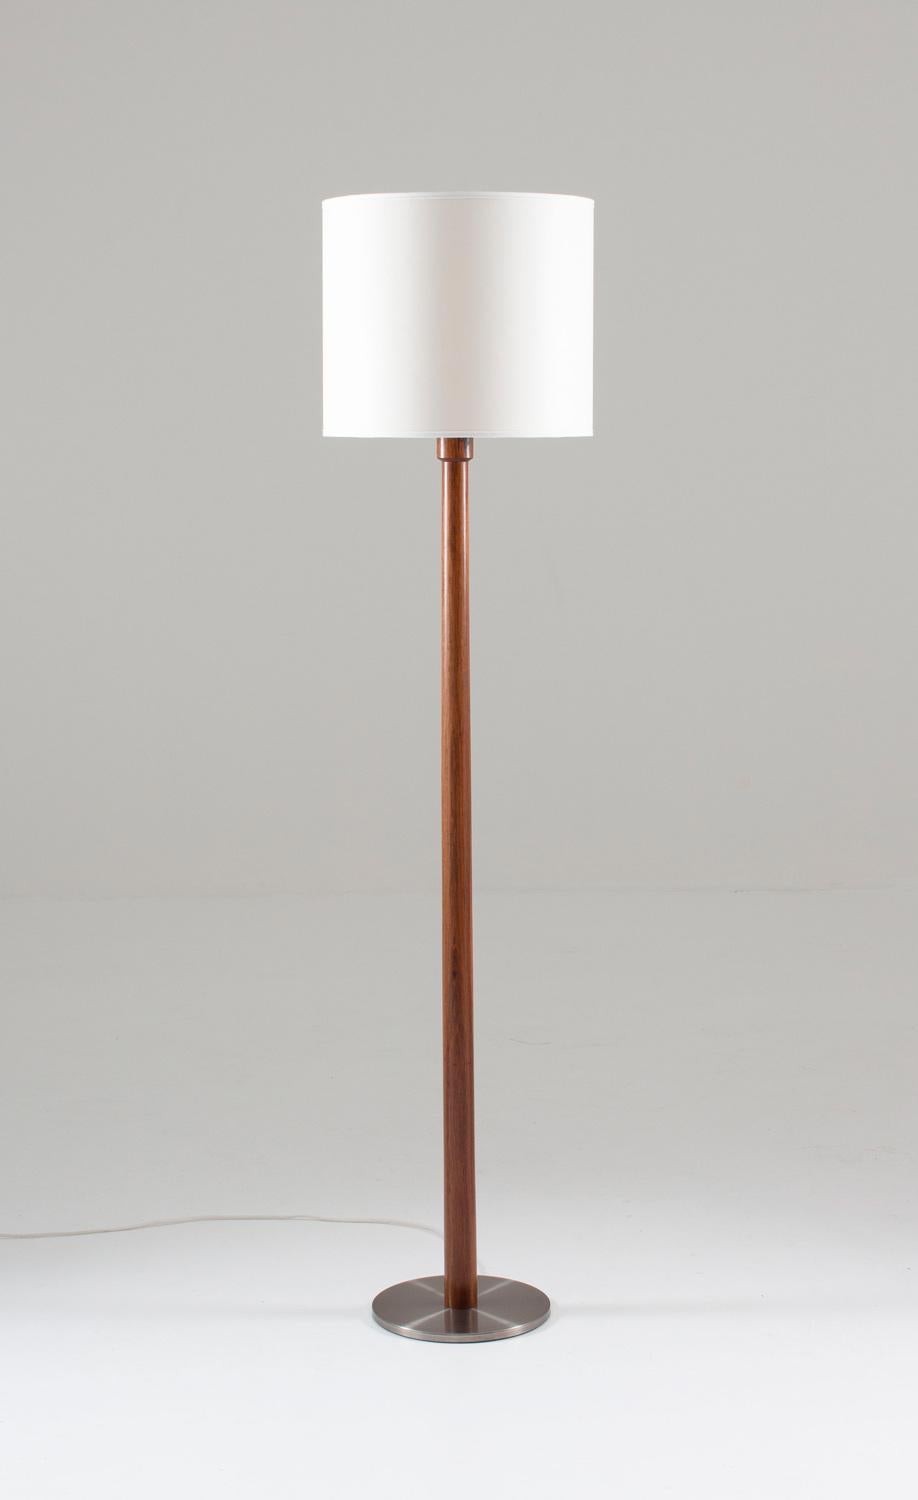 Big floor lamp in rosewood and steel by Uno & Östen Kristiansson for Luxus.
This rare lamp is made of solid rosewood with a foot in brushed steel. The switch is beautifully integrated into the wood. As always with Luxus products, it shows great